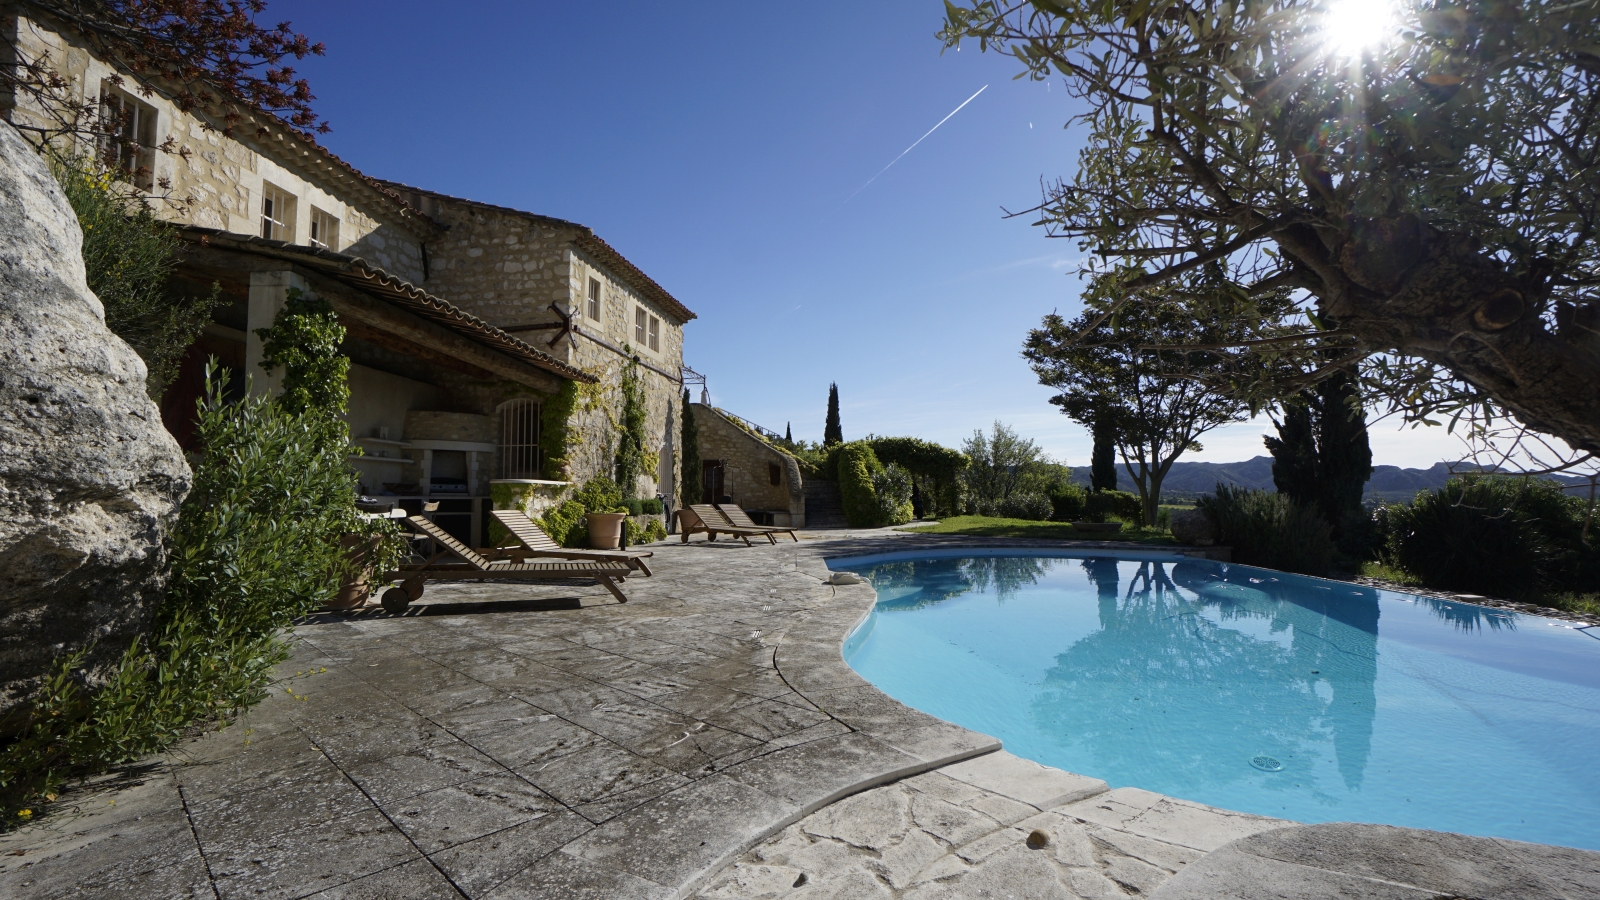 Pool and pool area with plants, sun loungers, grass, trees and mountain view at Les Rochers in Provence, France